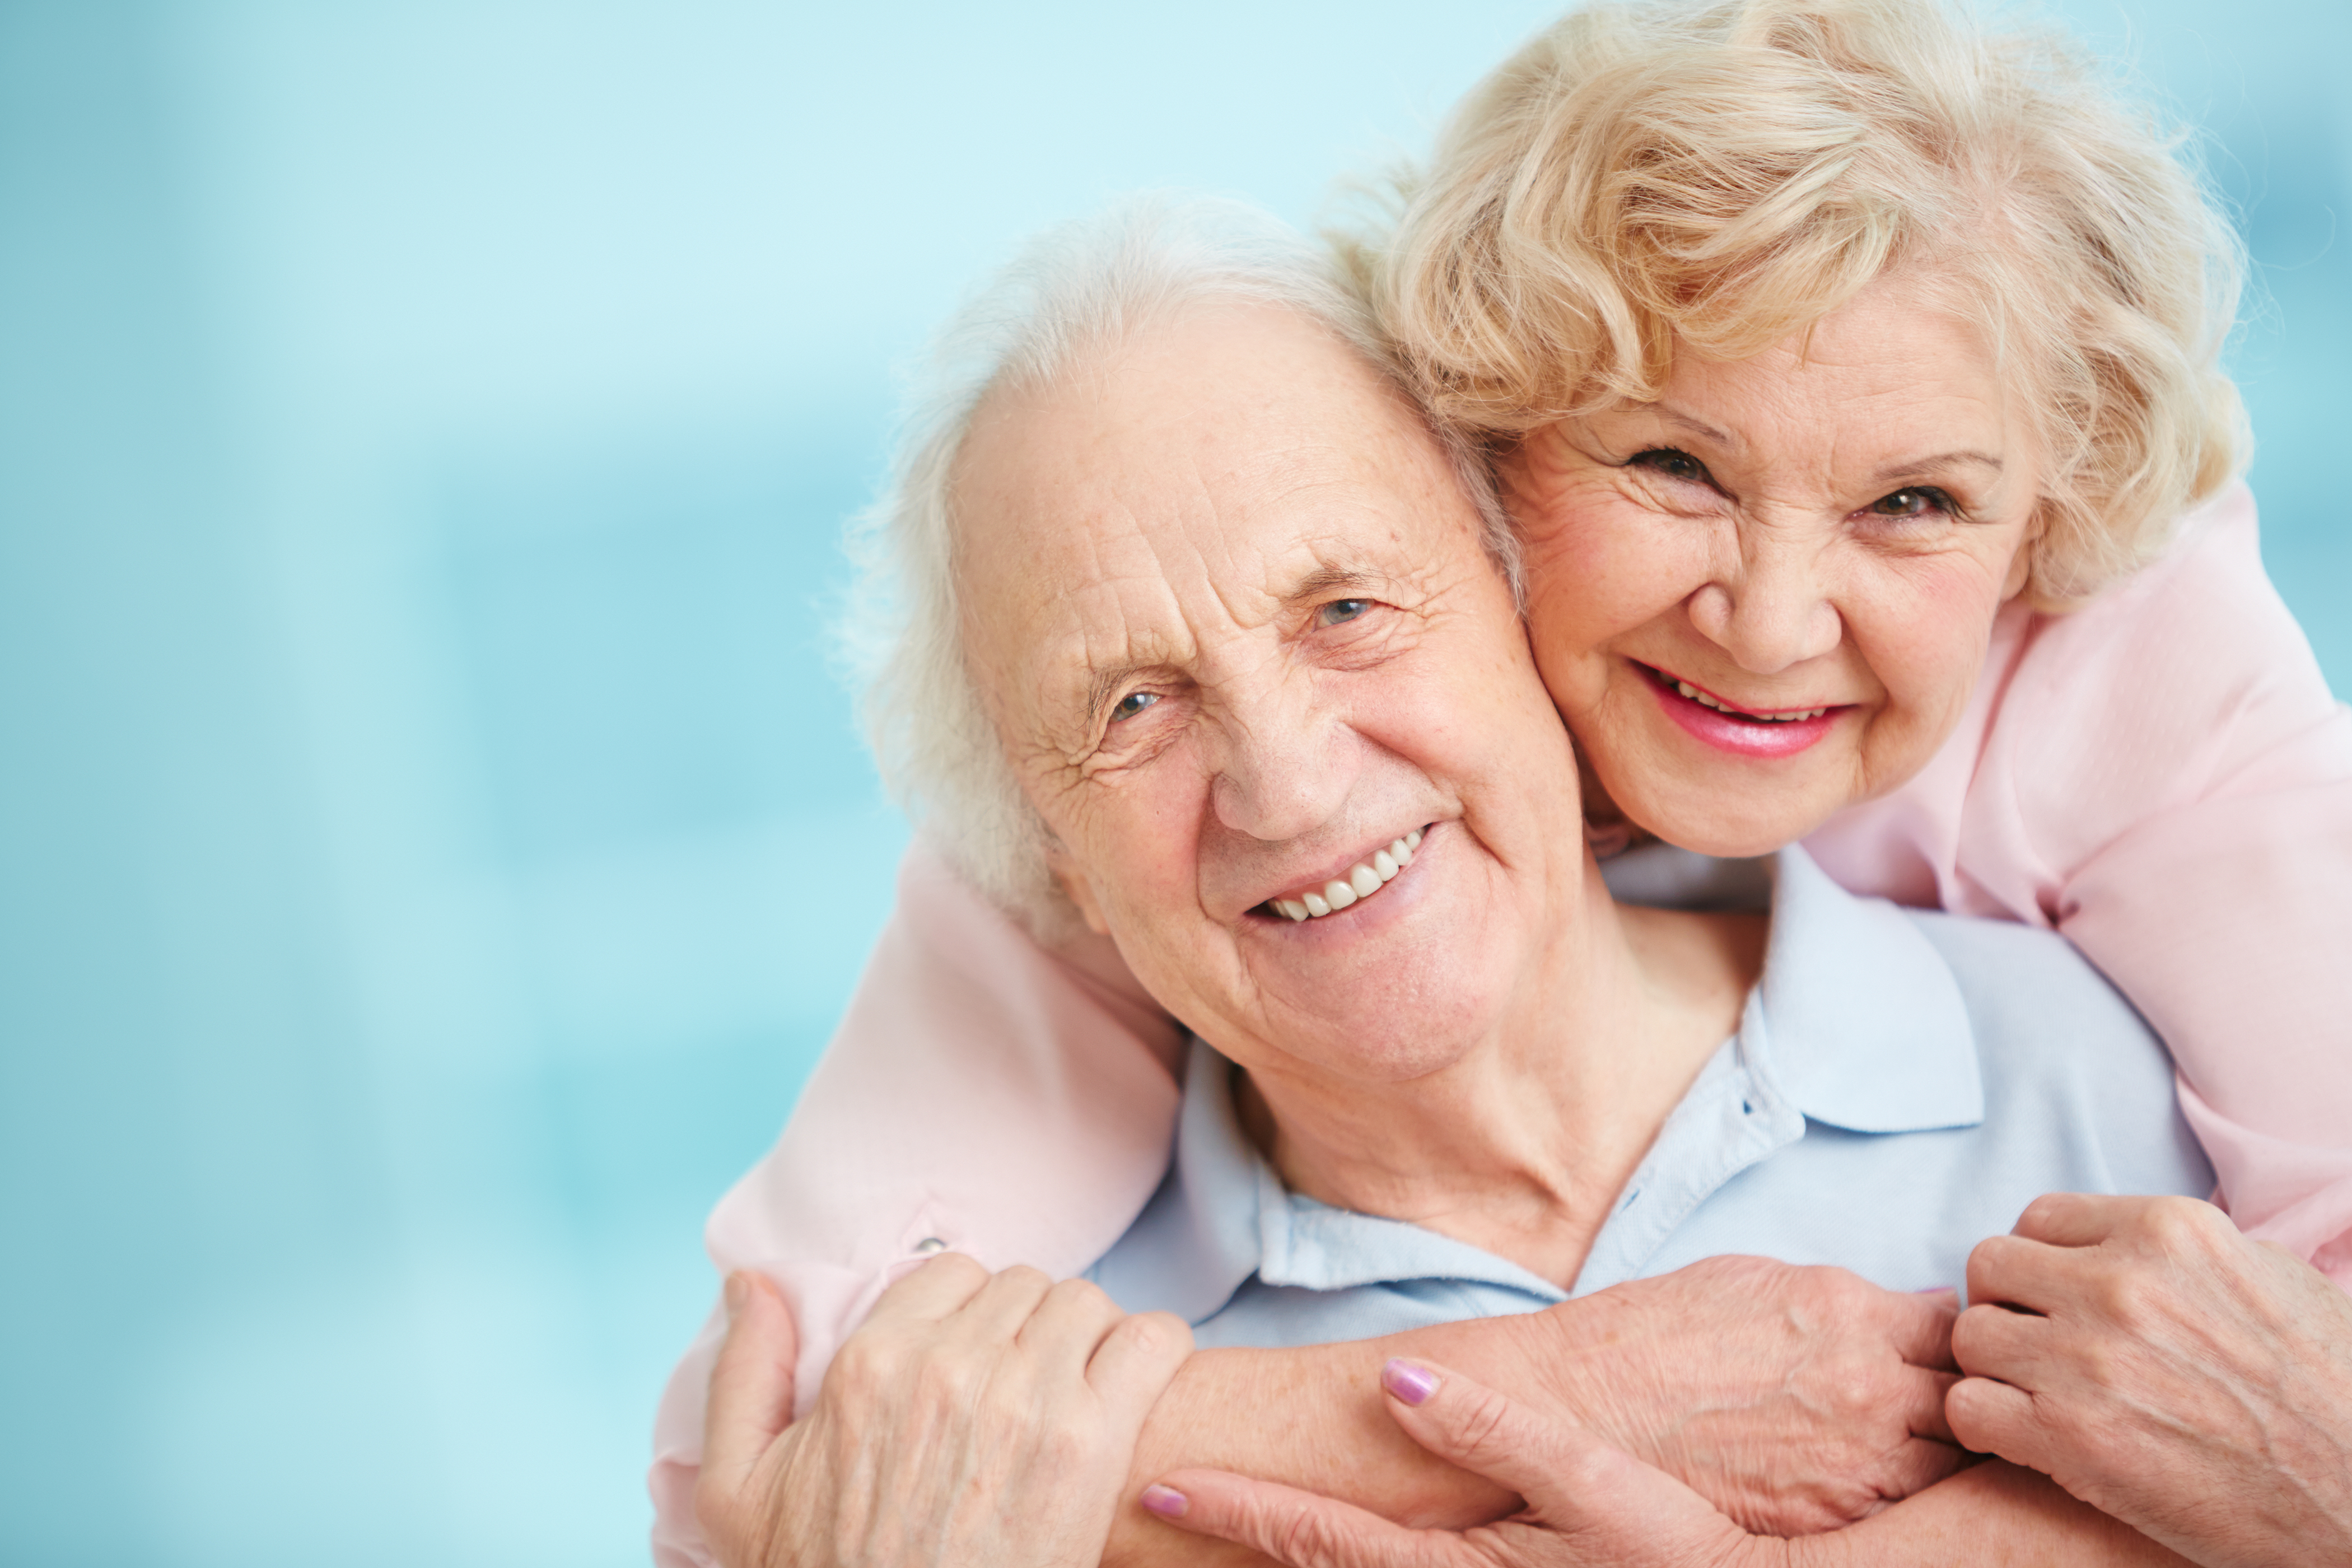 Happy and affectionate elderly couple looking at camera with smiles